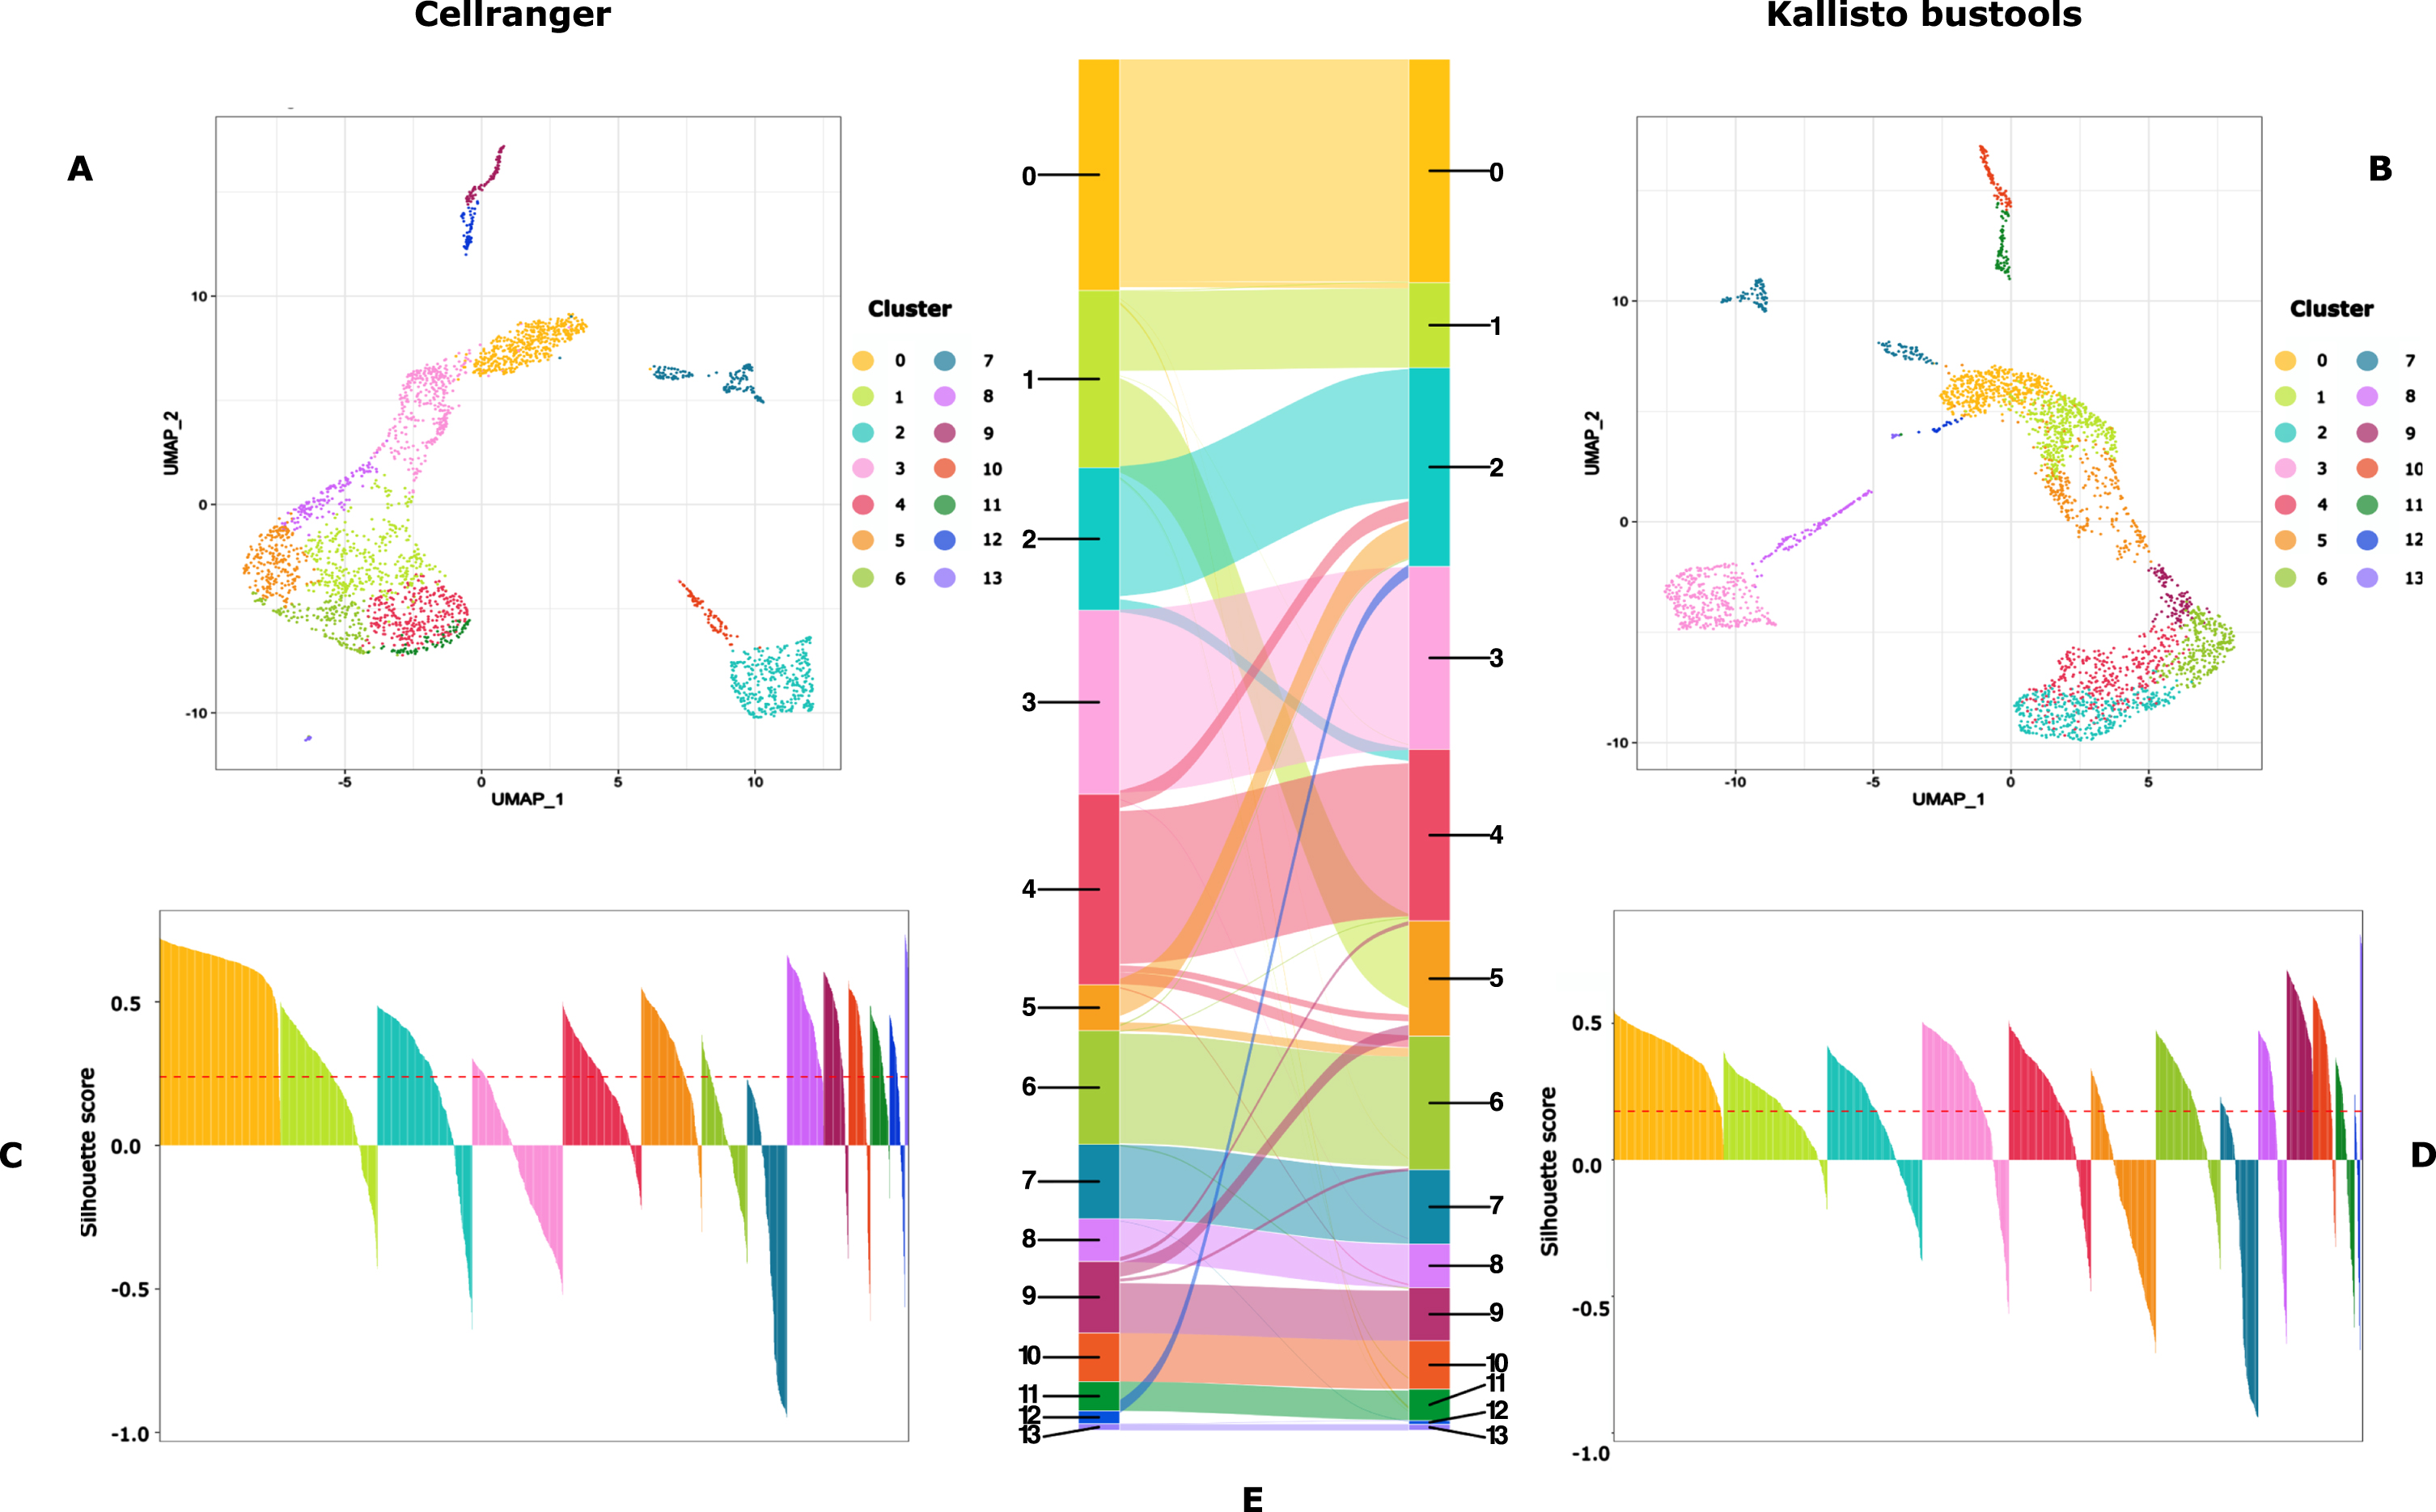 Cluster characterization: UMAP representation (A and B) and Silhouette scores (C and D) of the clusters obtained on data processed with CellRanger (A and C) or Kallisto-bustools (B and D). In E, is shown an alluvial plot highlighting the conservation and differences in cluster composition depending upon the initial mapping method.